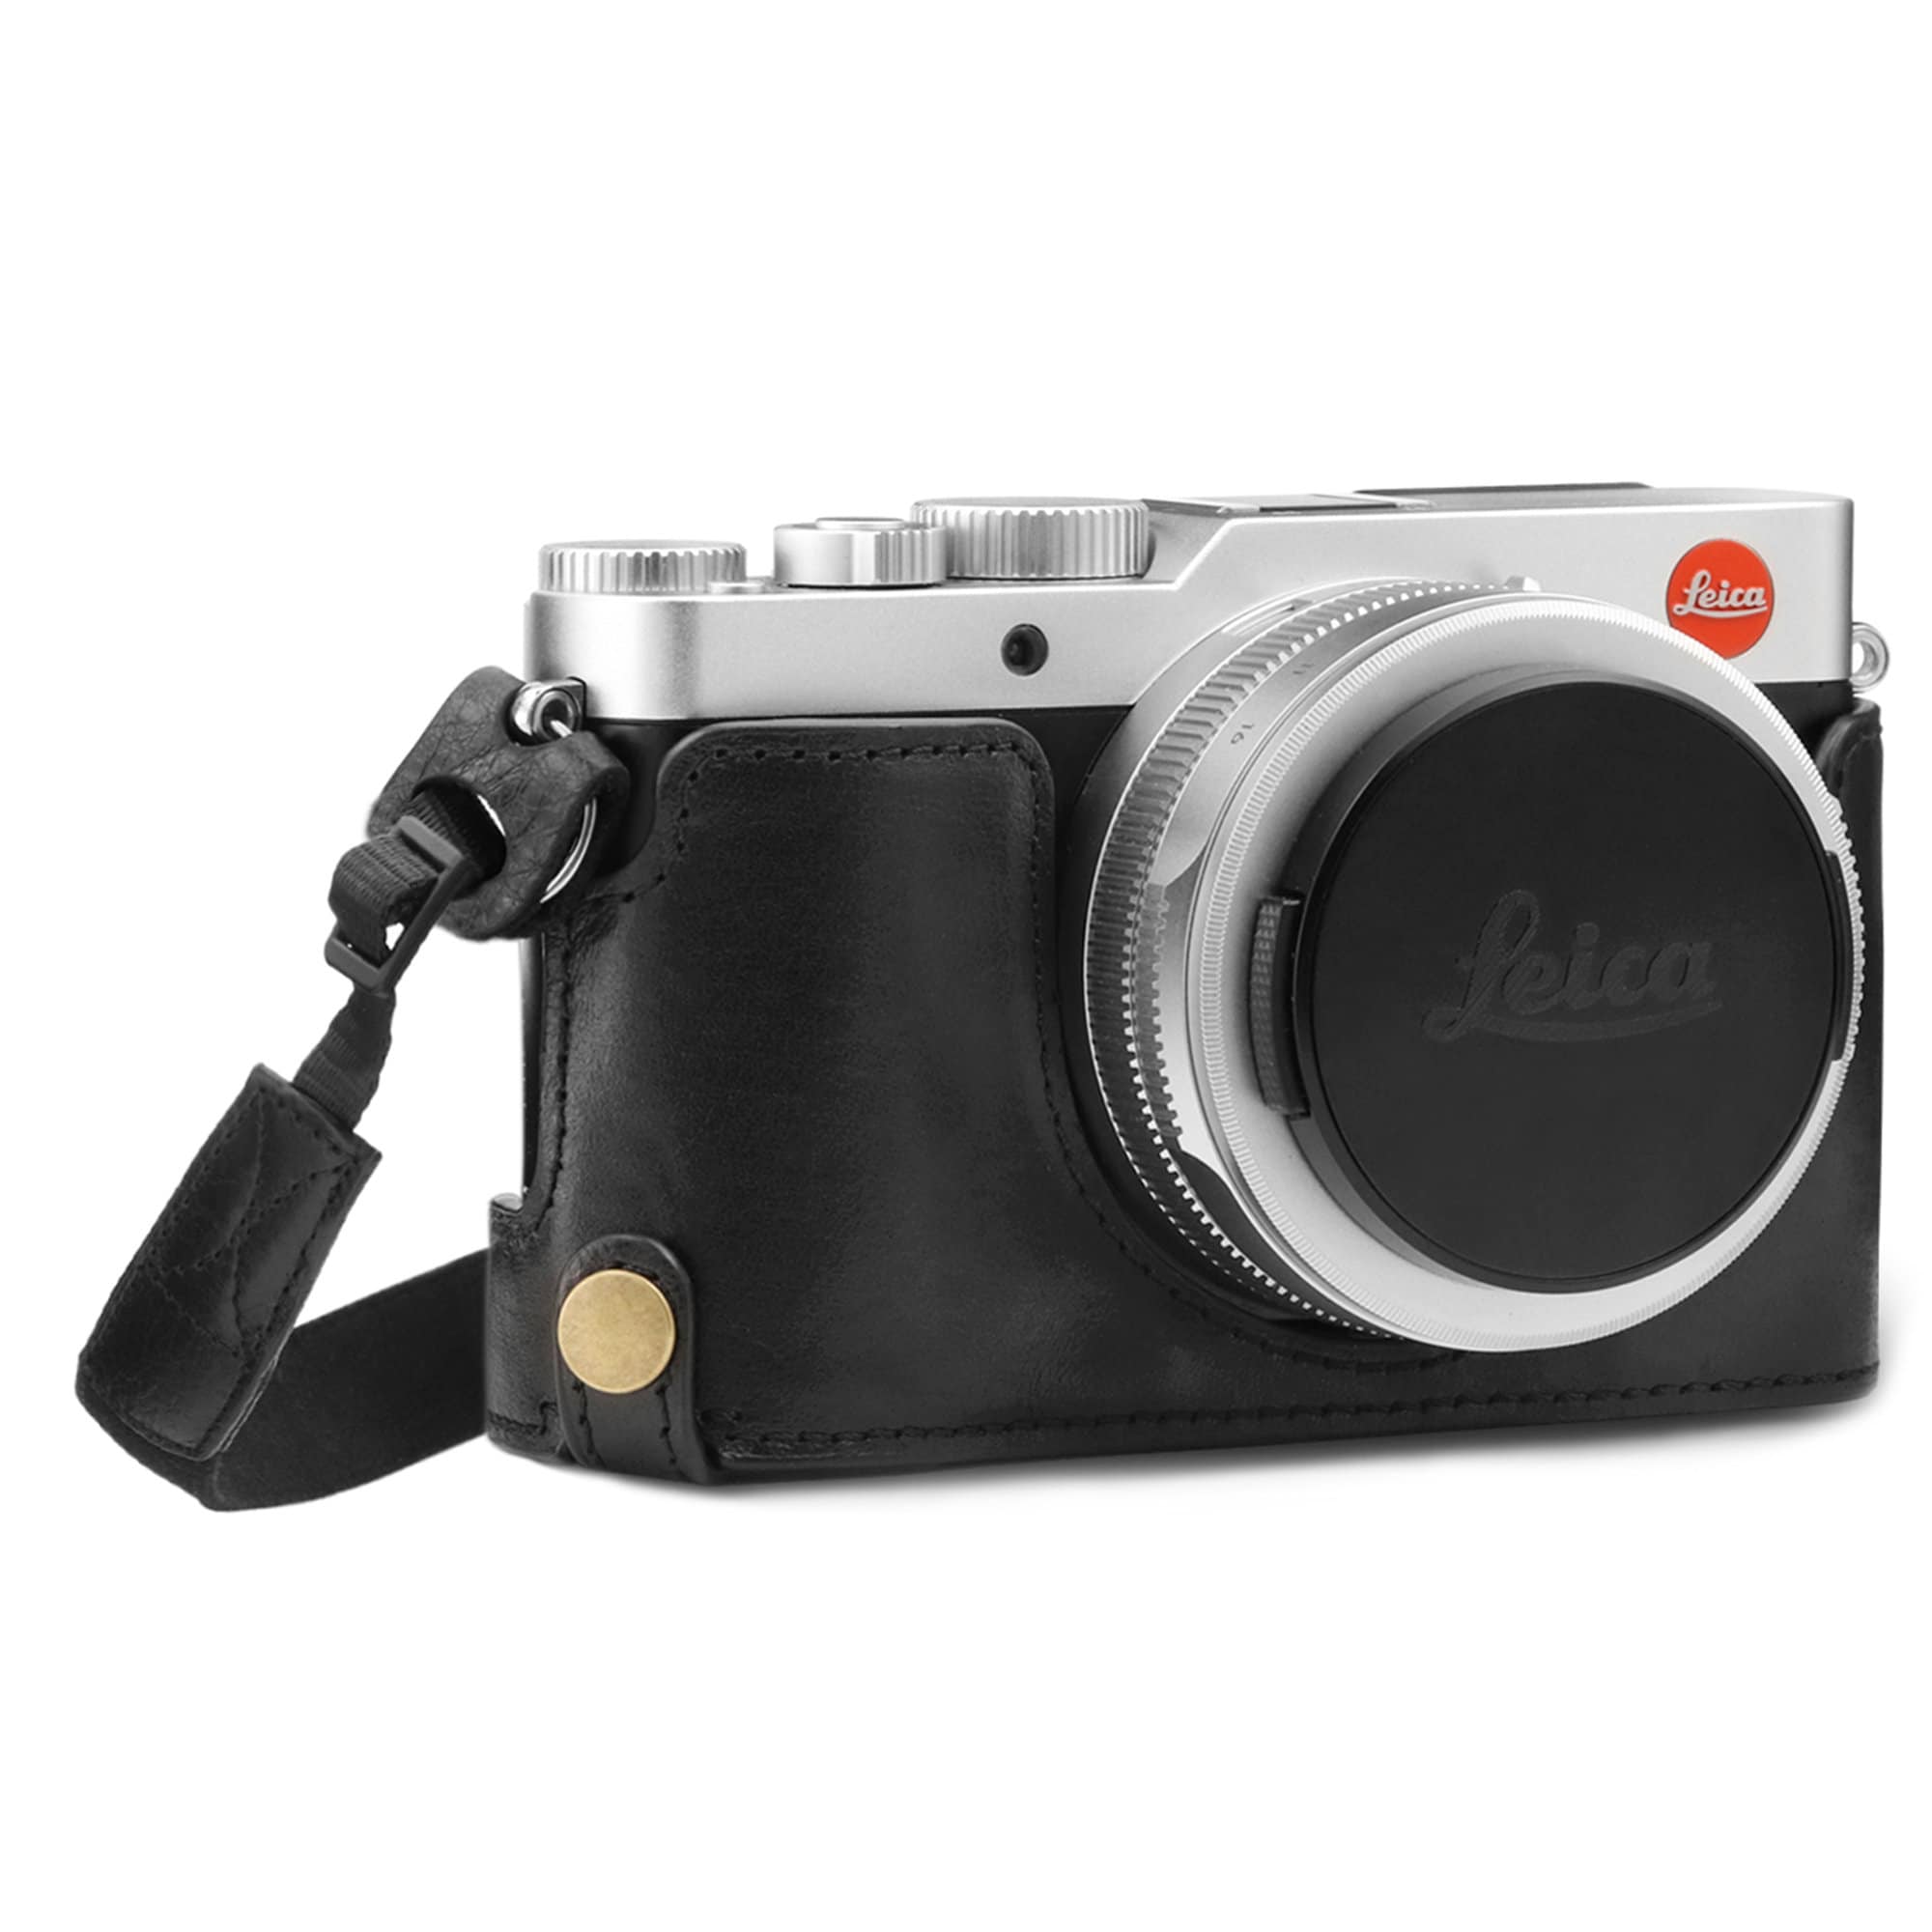 42nd Street Photo - Leica 18821 - Camera - Cases (Protect Your Camera Gear)  - Case Pouch Cover For Leica D-LUX Typ 109